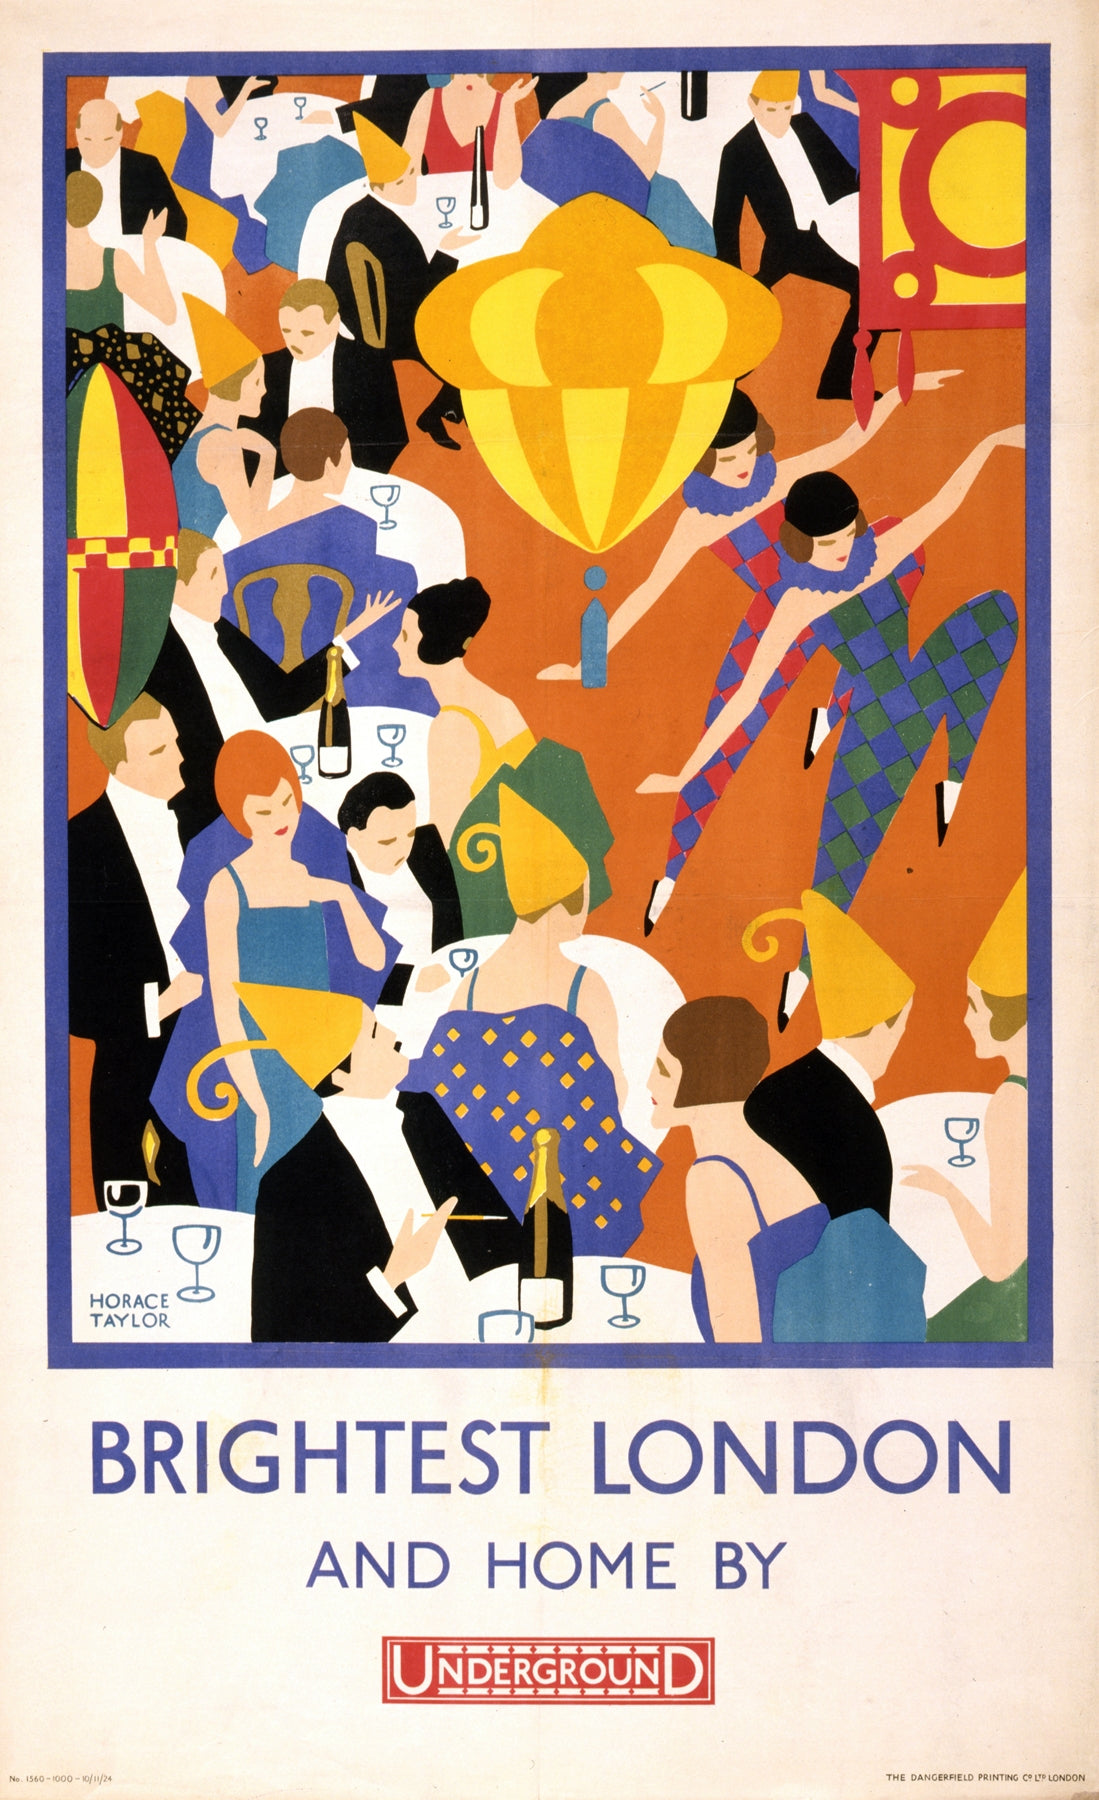 London Underground Poster (Dancing) (1920s) | Vintage travel posters | Horace Taylor Posters, Prints, & Visual Artwork The Trumpet Shop   